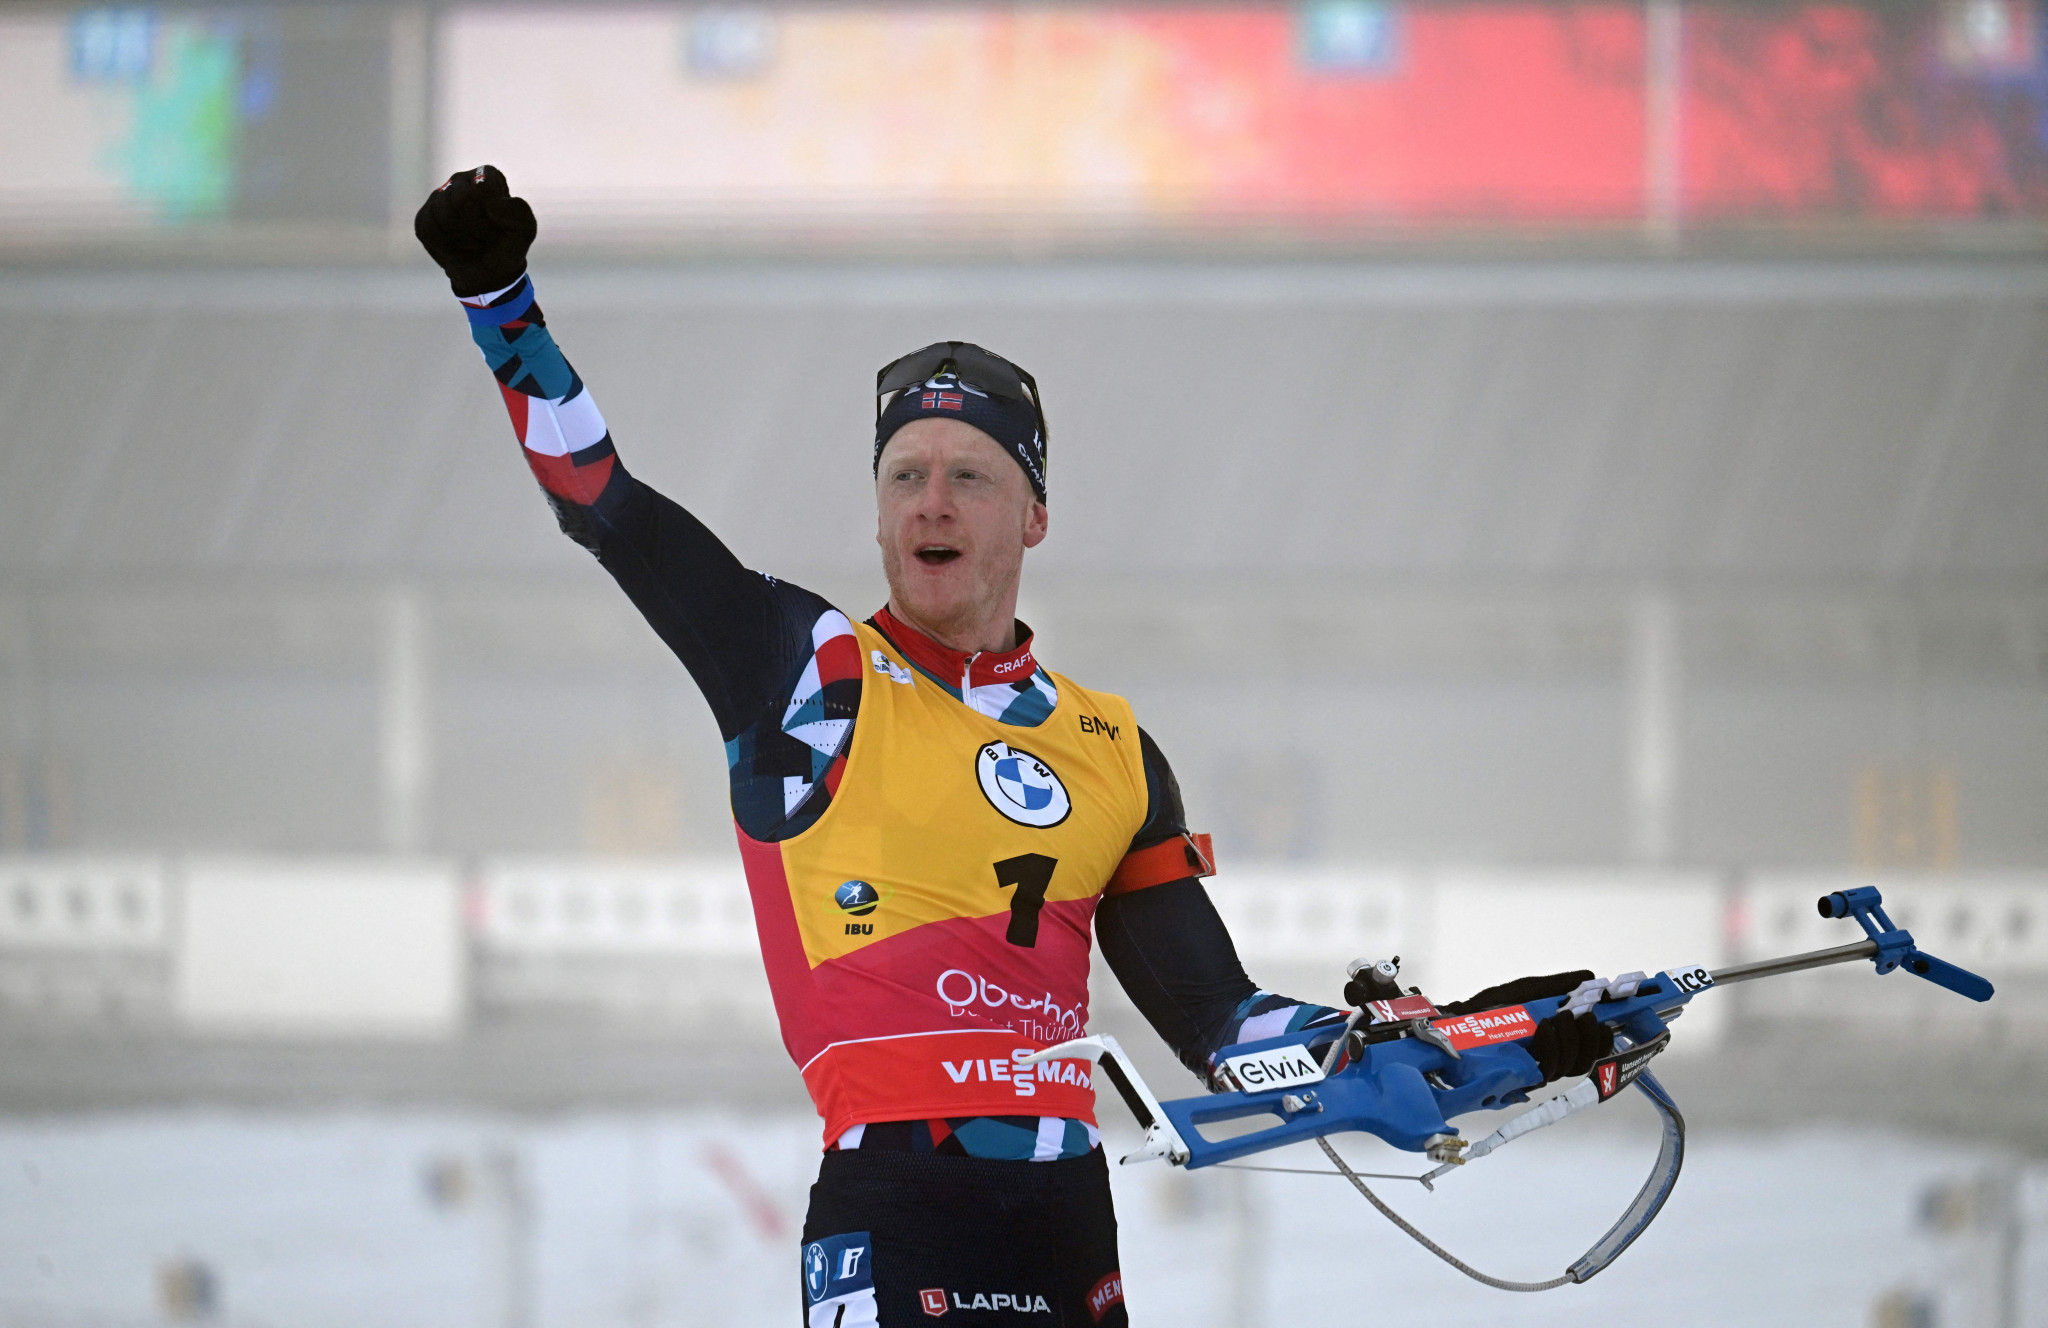 Norway's Johannes Thingnes Bø won his first pursuit world title by more than one minute in Oberhof ©Getty Images